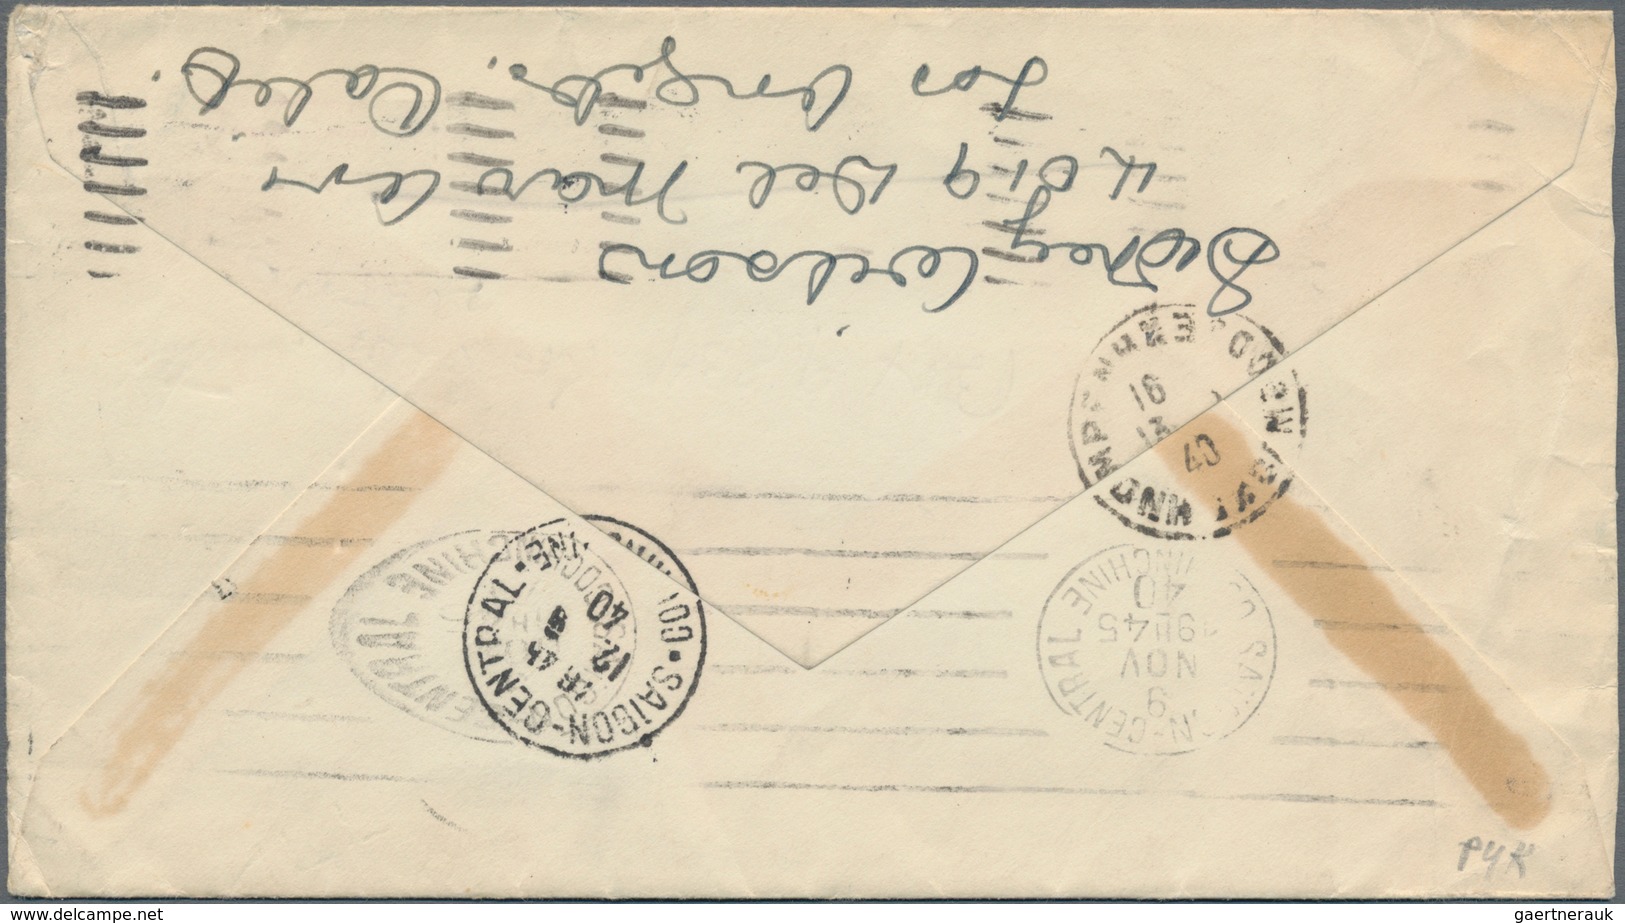 Kambodscha: 1940, Incoming Mail,USA, Cover W. 3 C.Pan American Union Pair Tied "LOS ANGELES AUG 8 19 - Cambodia